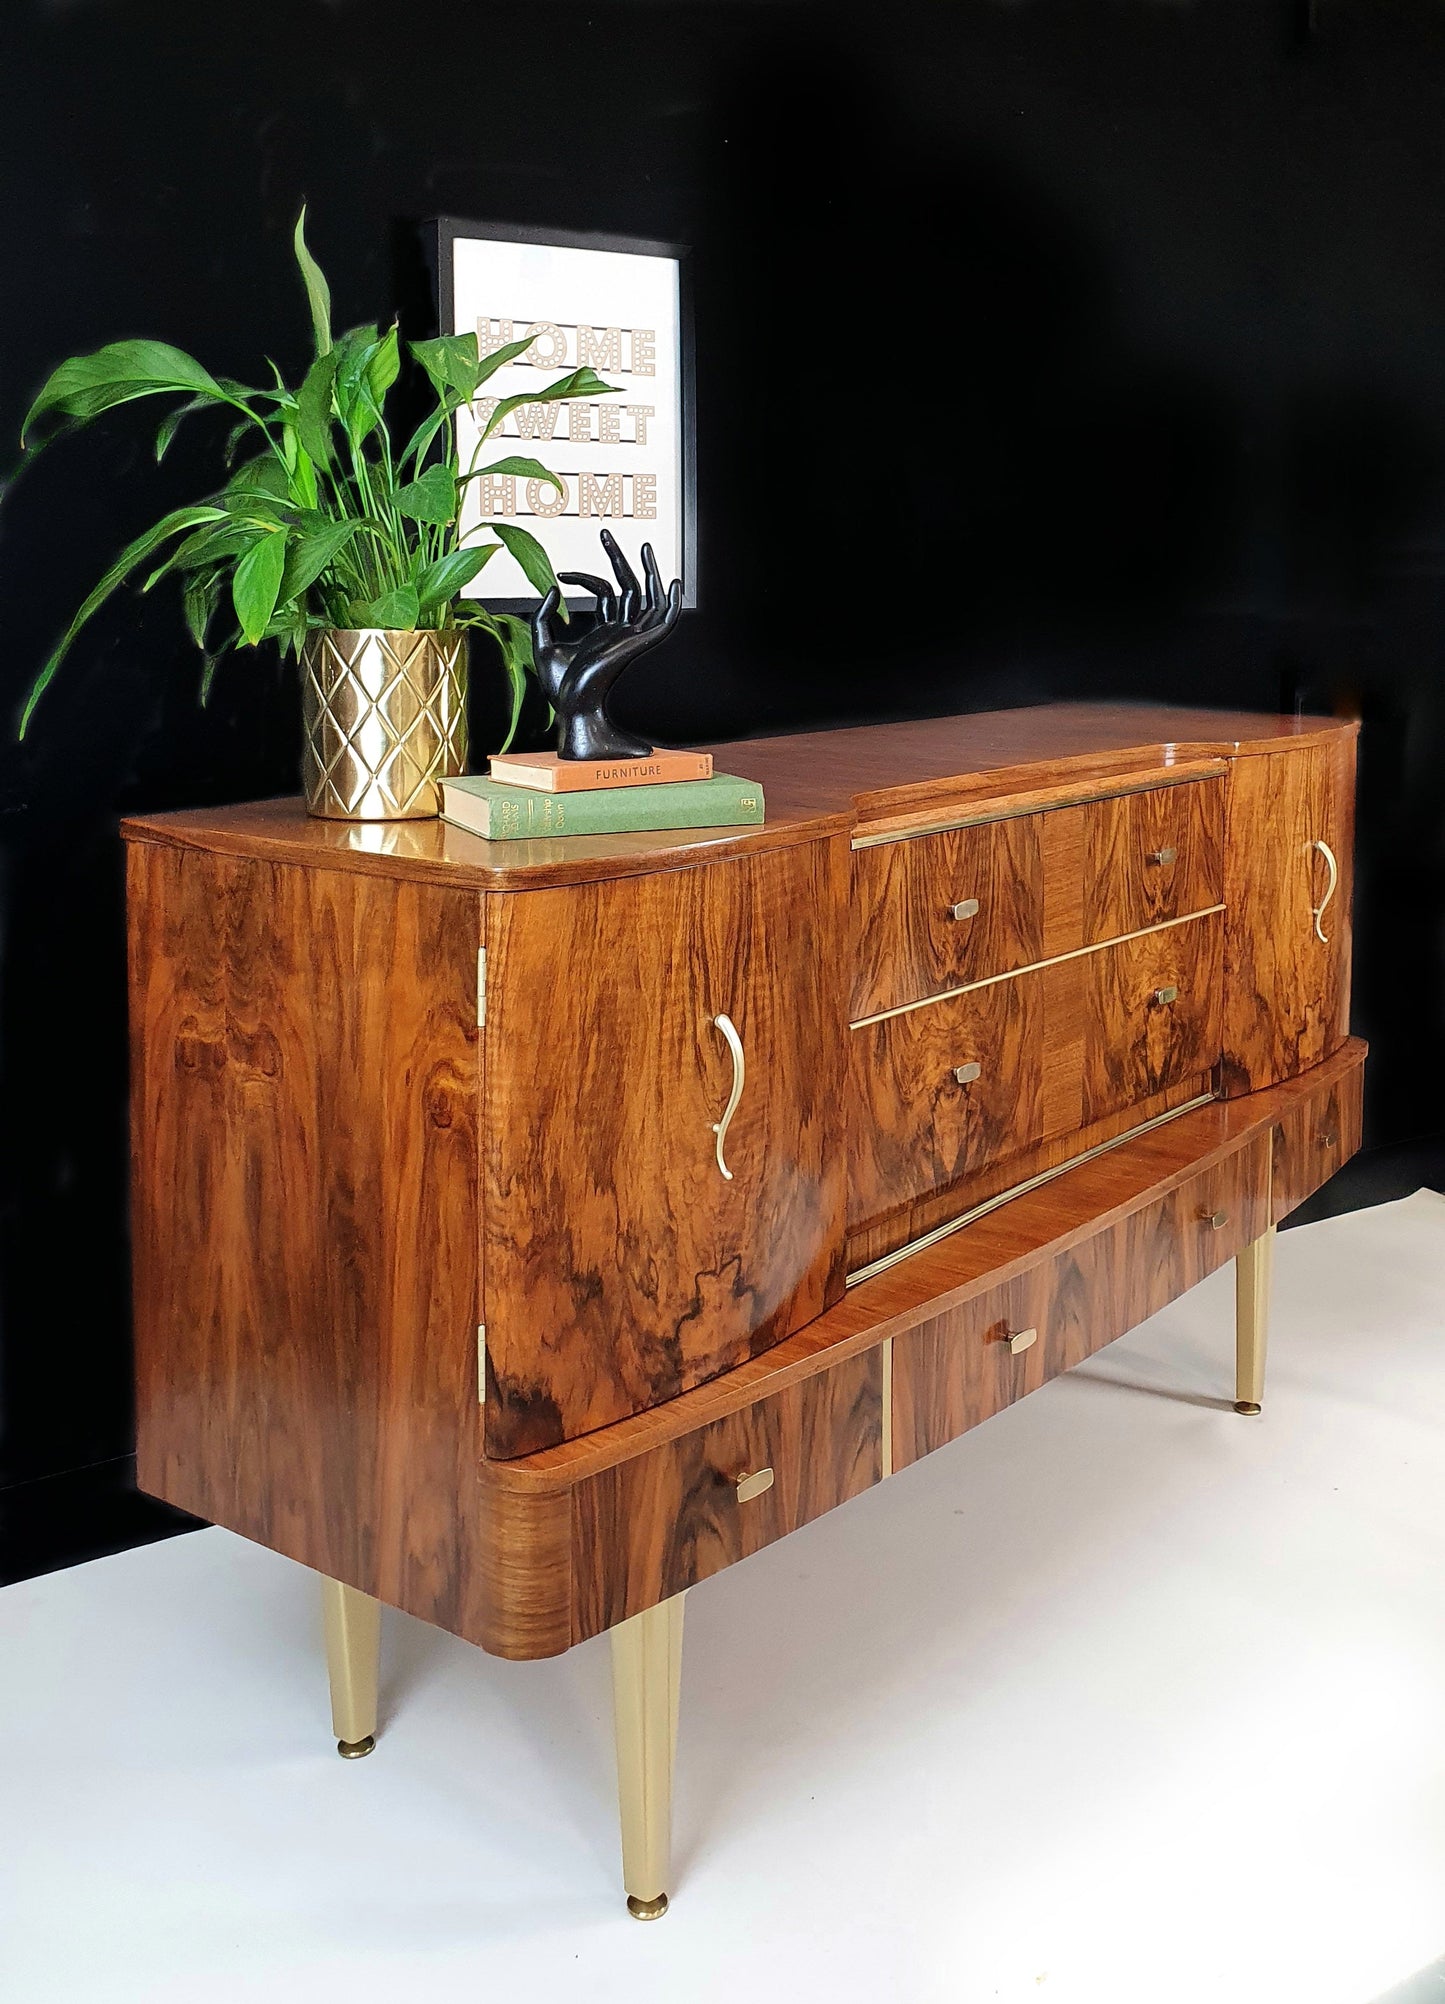 ONLINE COURSE: Confidently Restore & Refinish Vintage Wood Furniture